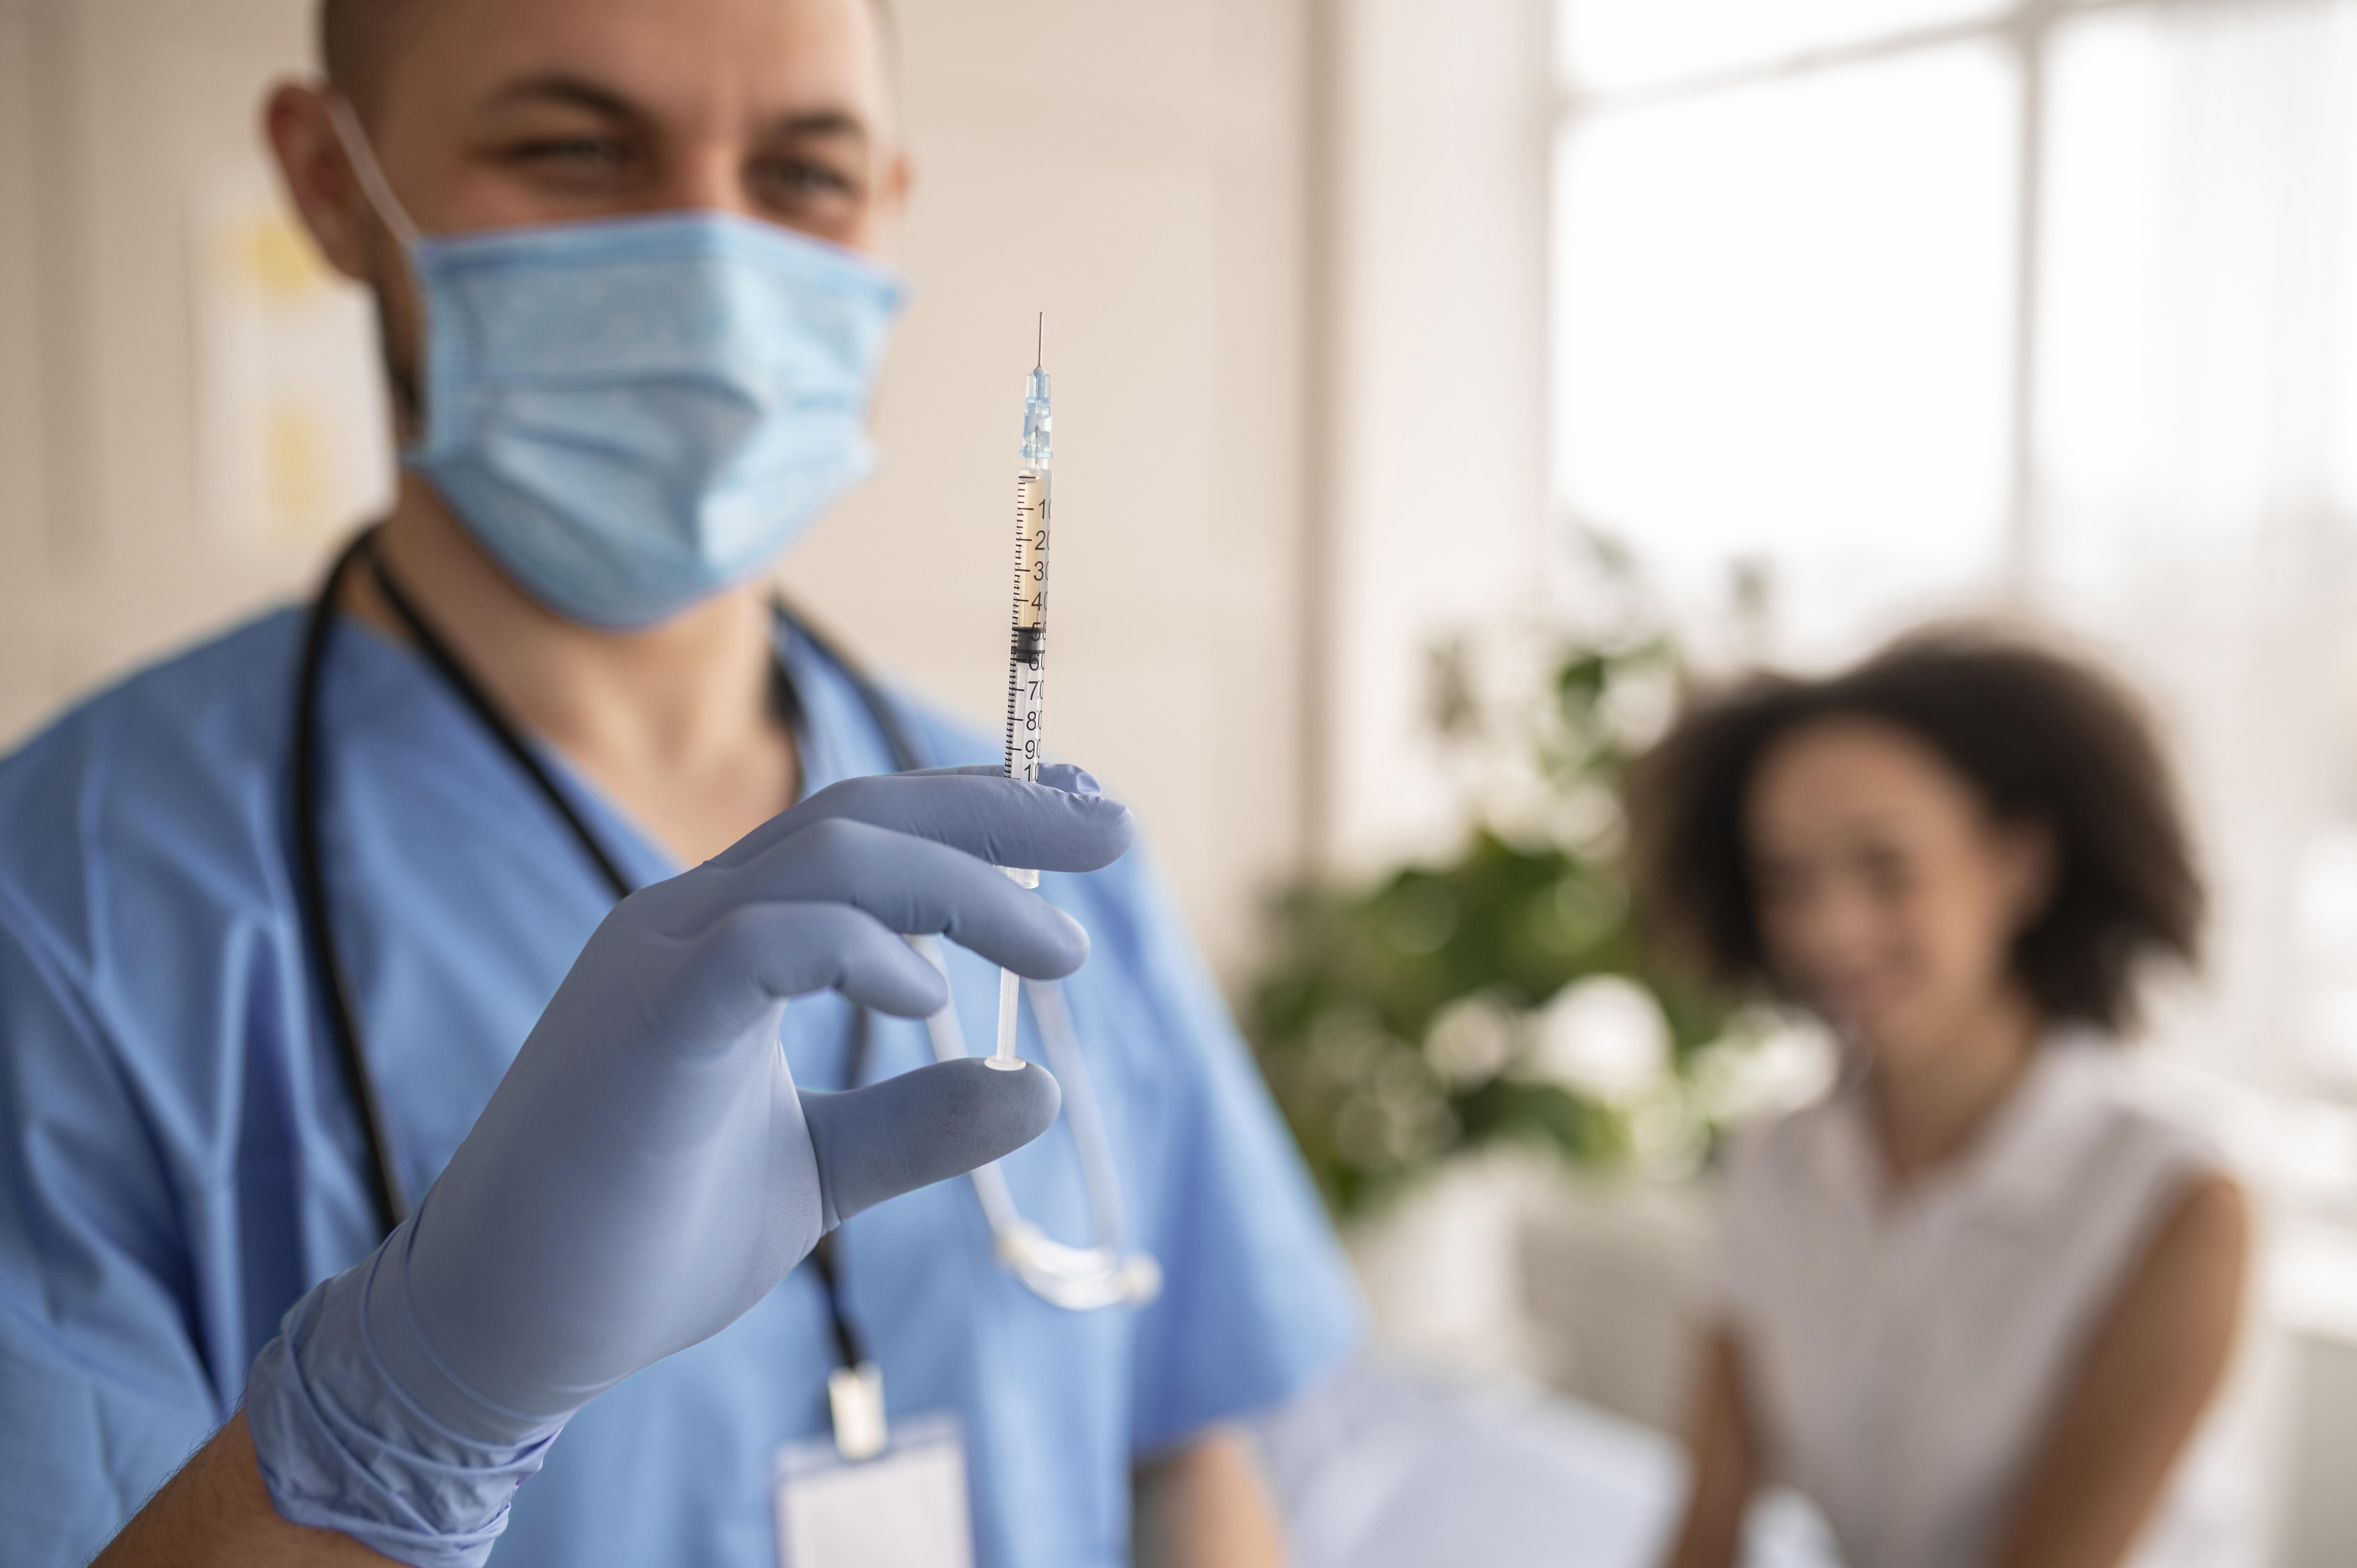 8 Things to Know Before Your Second COVID-19 Vaccine